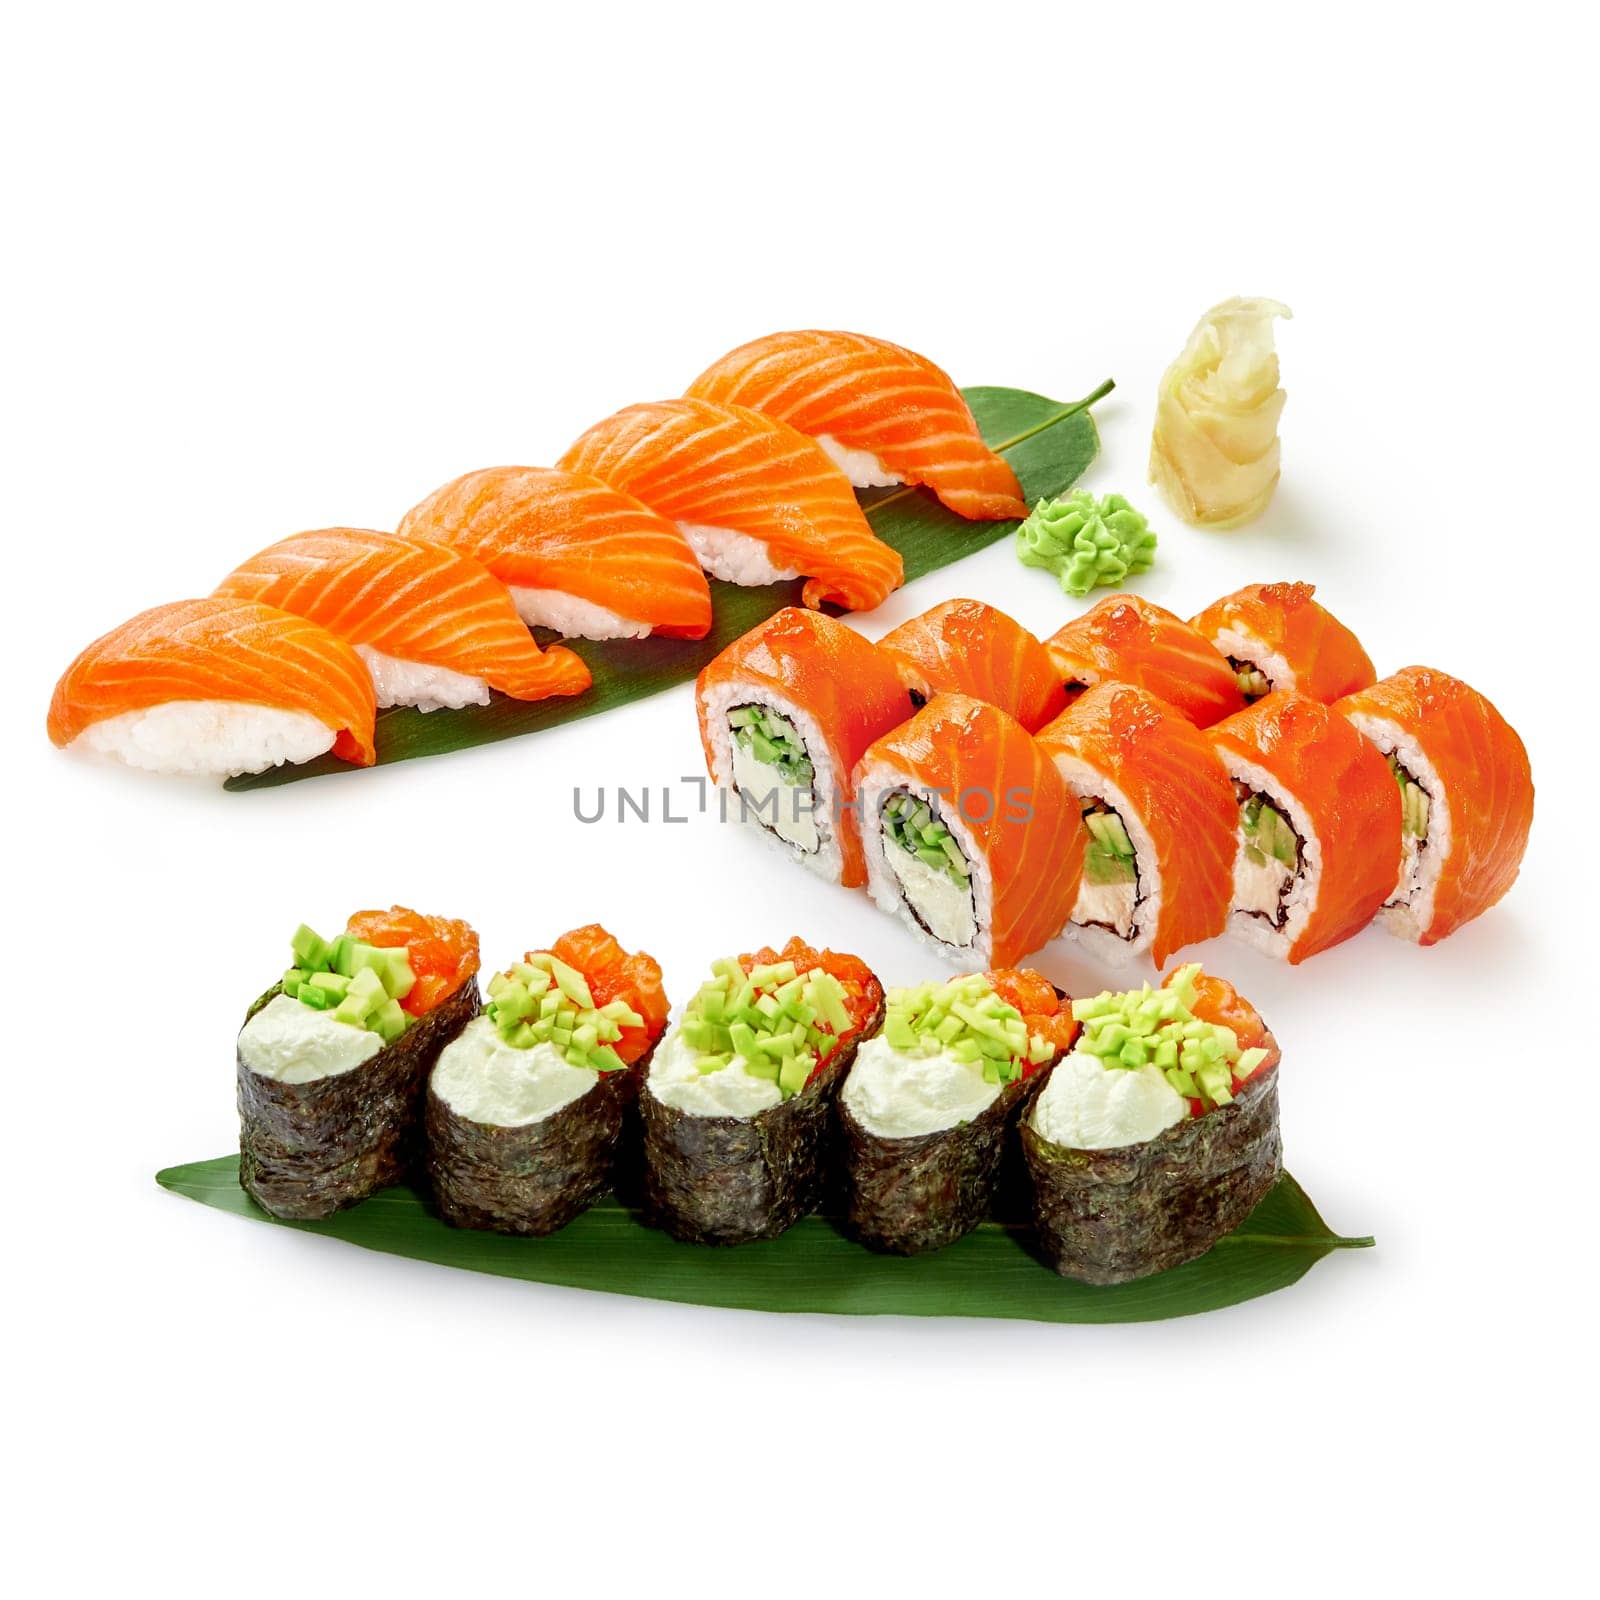 Enticing salmon sushi set featuring nigiri, gunkan, and rolls with delicate toppings and fillings of fresh salmon, elegantly displayed on bamboo leaf with wasabi and pickled ginger